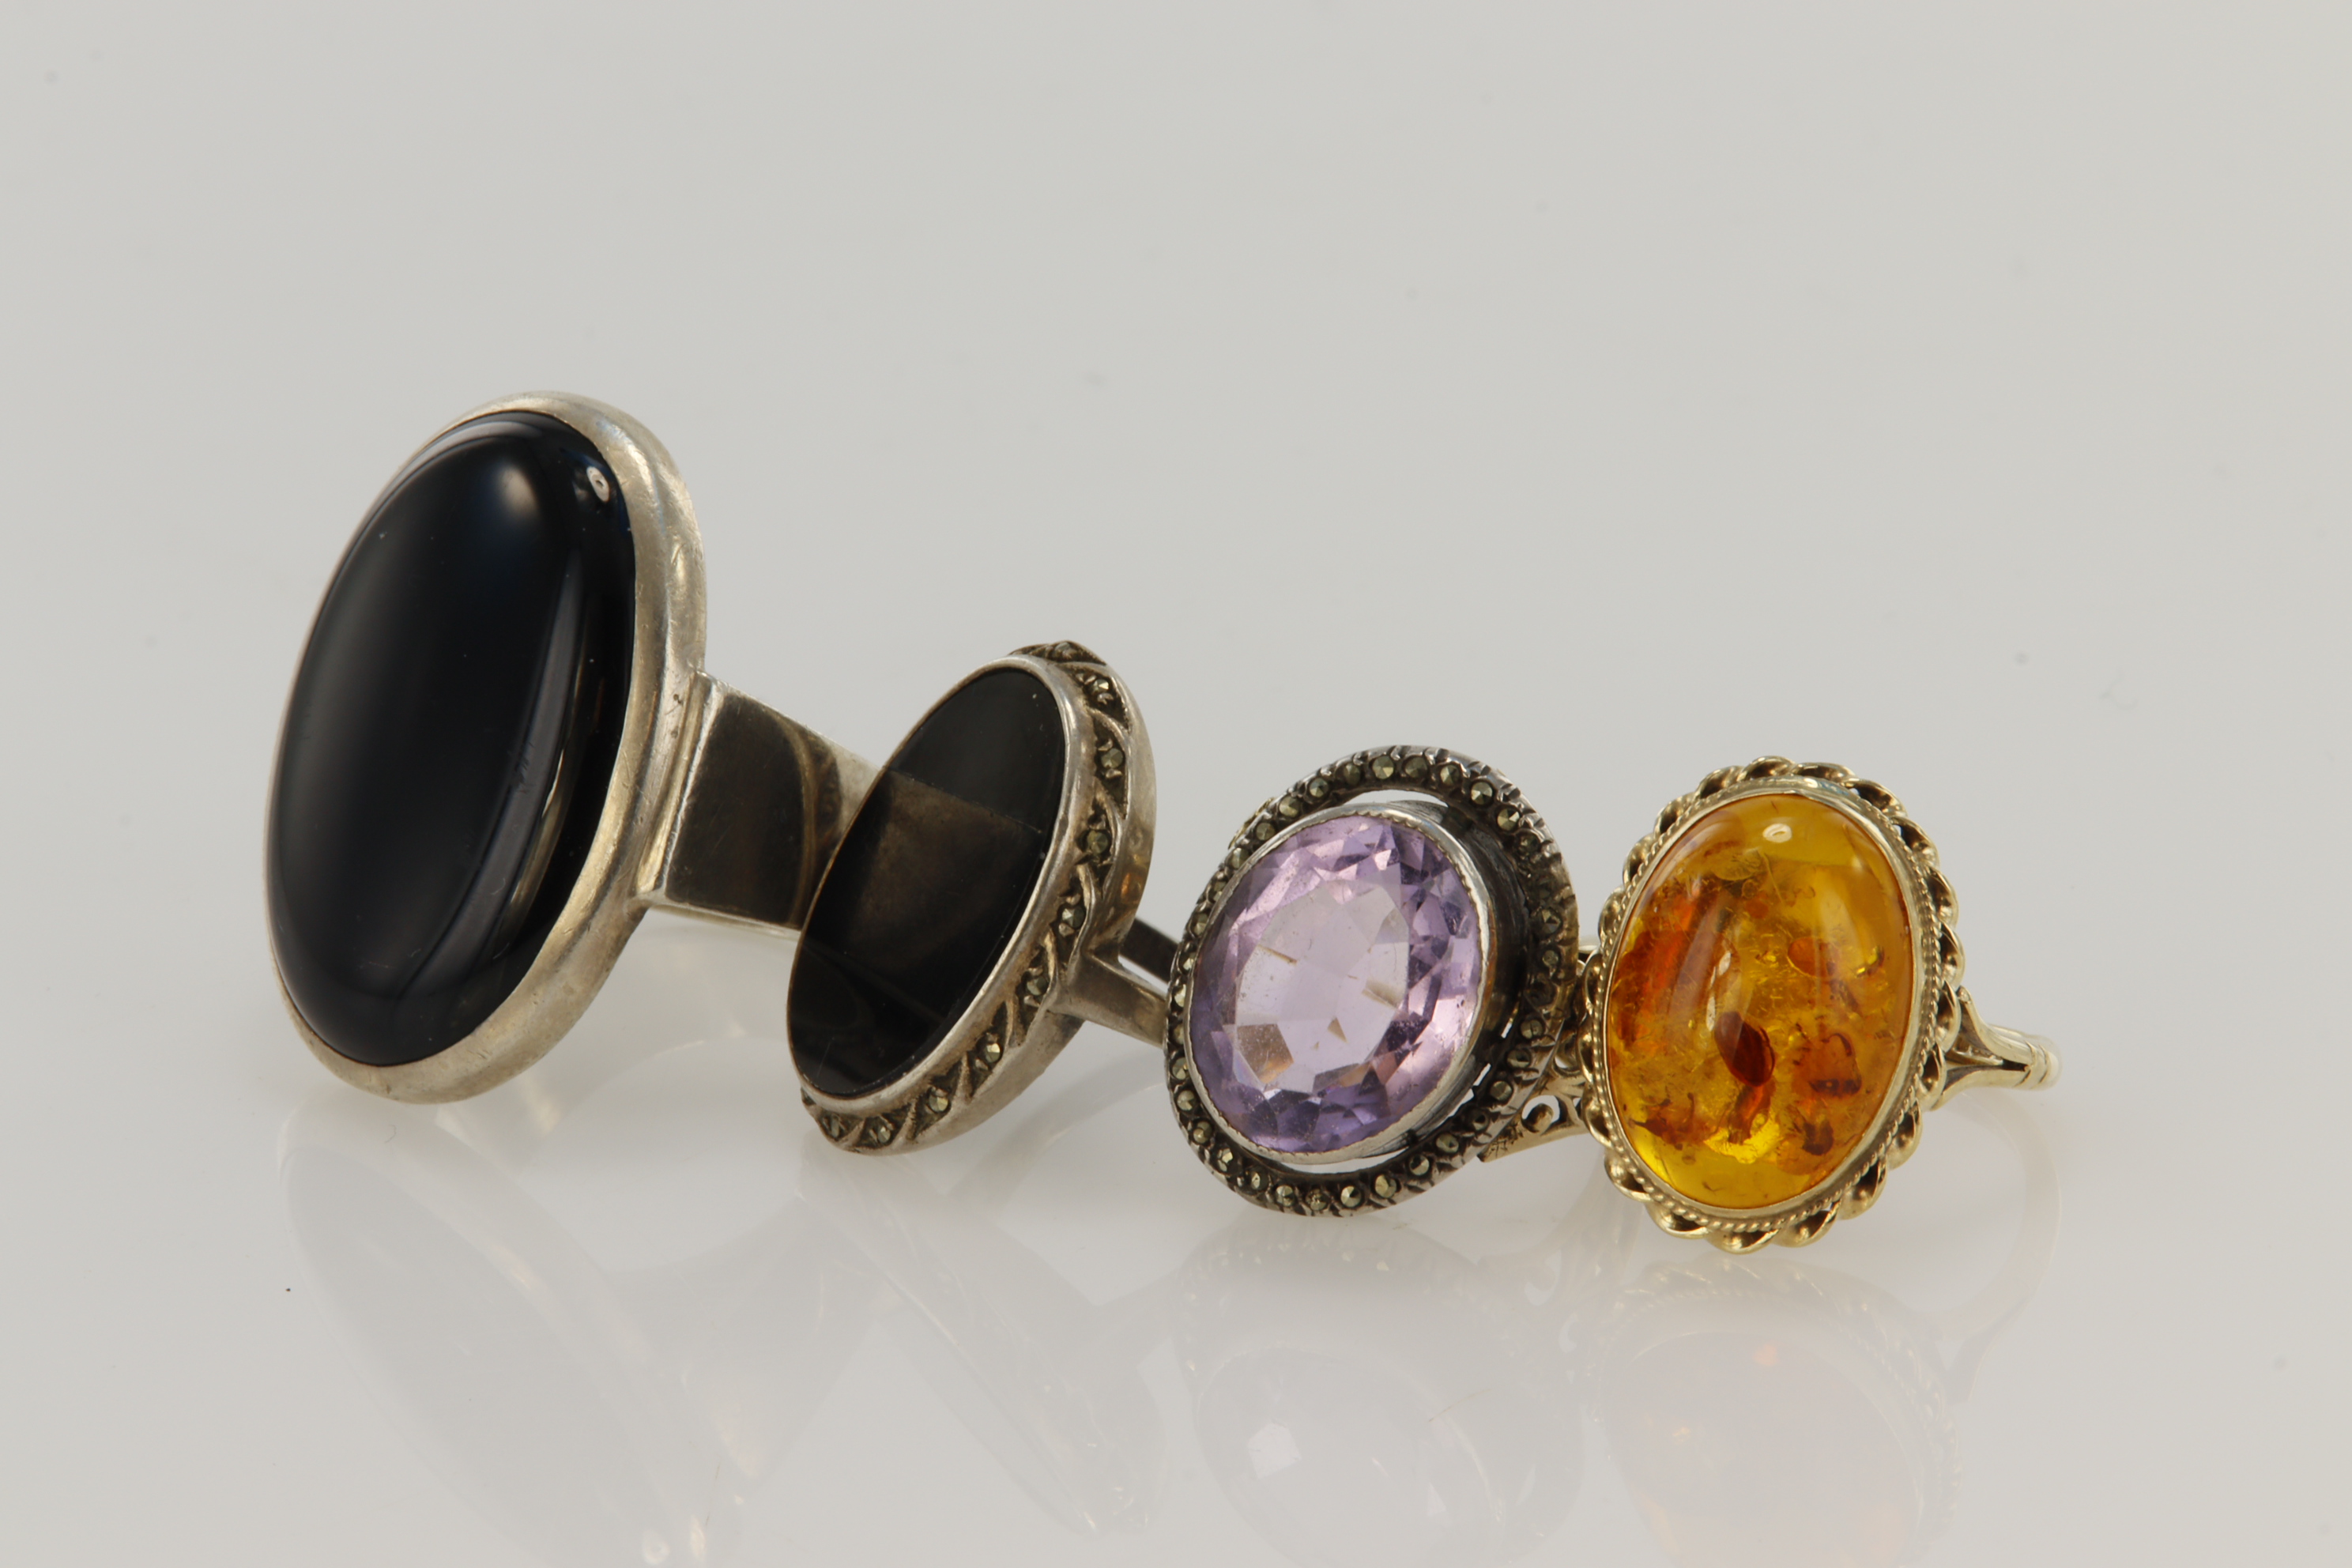 Four rings, one 9ct gold and amber ring, amber measures 17 x 12mm, finger size Q/R. Yellow gold (